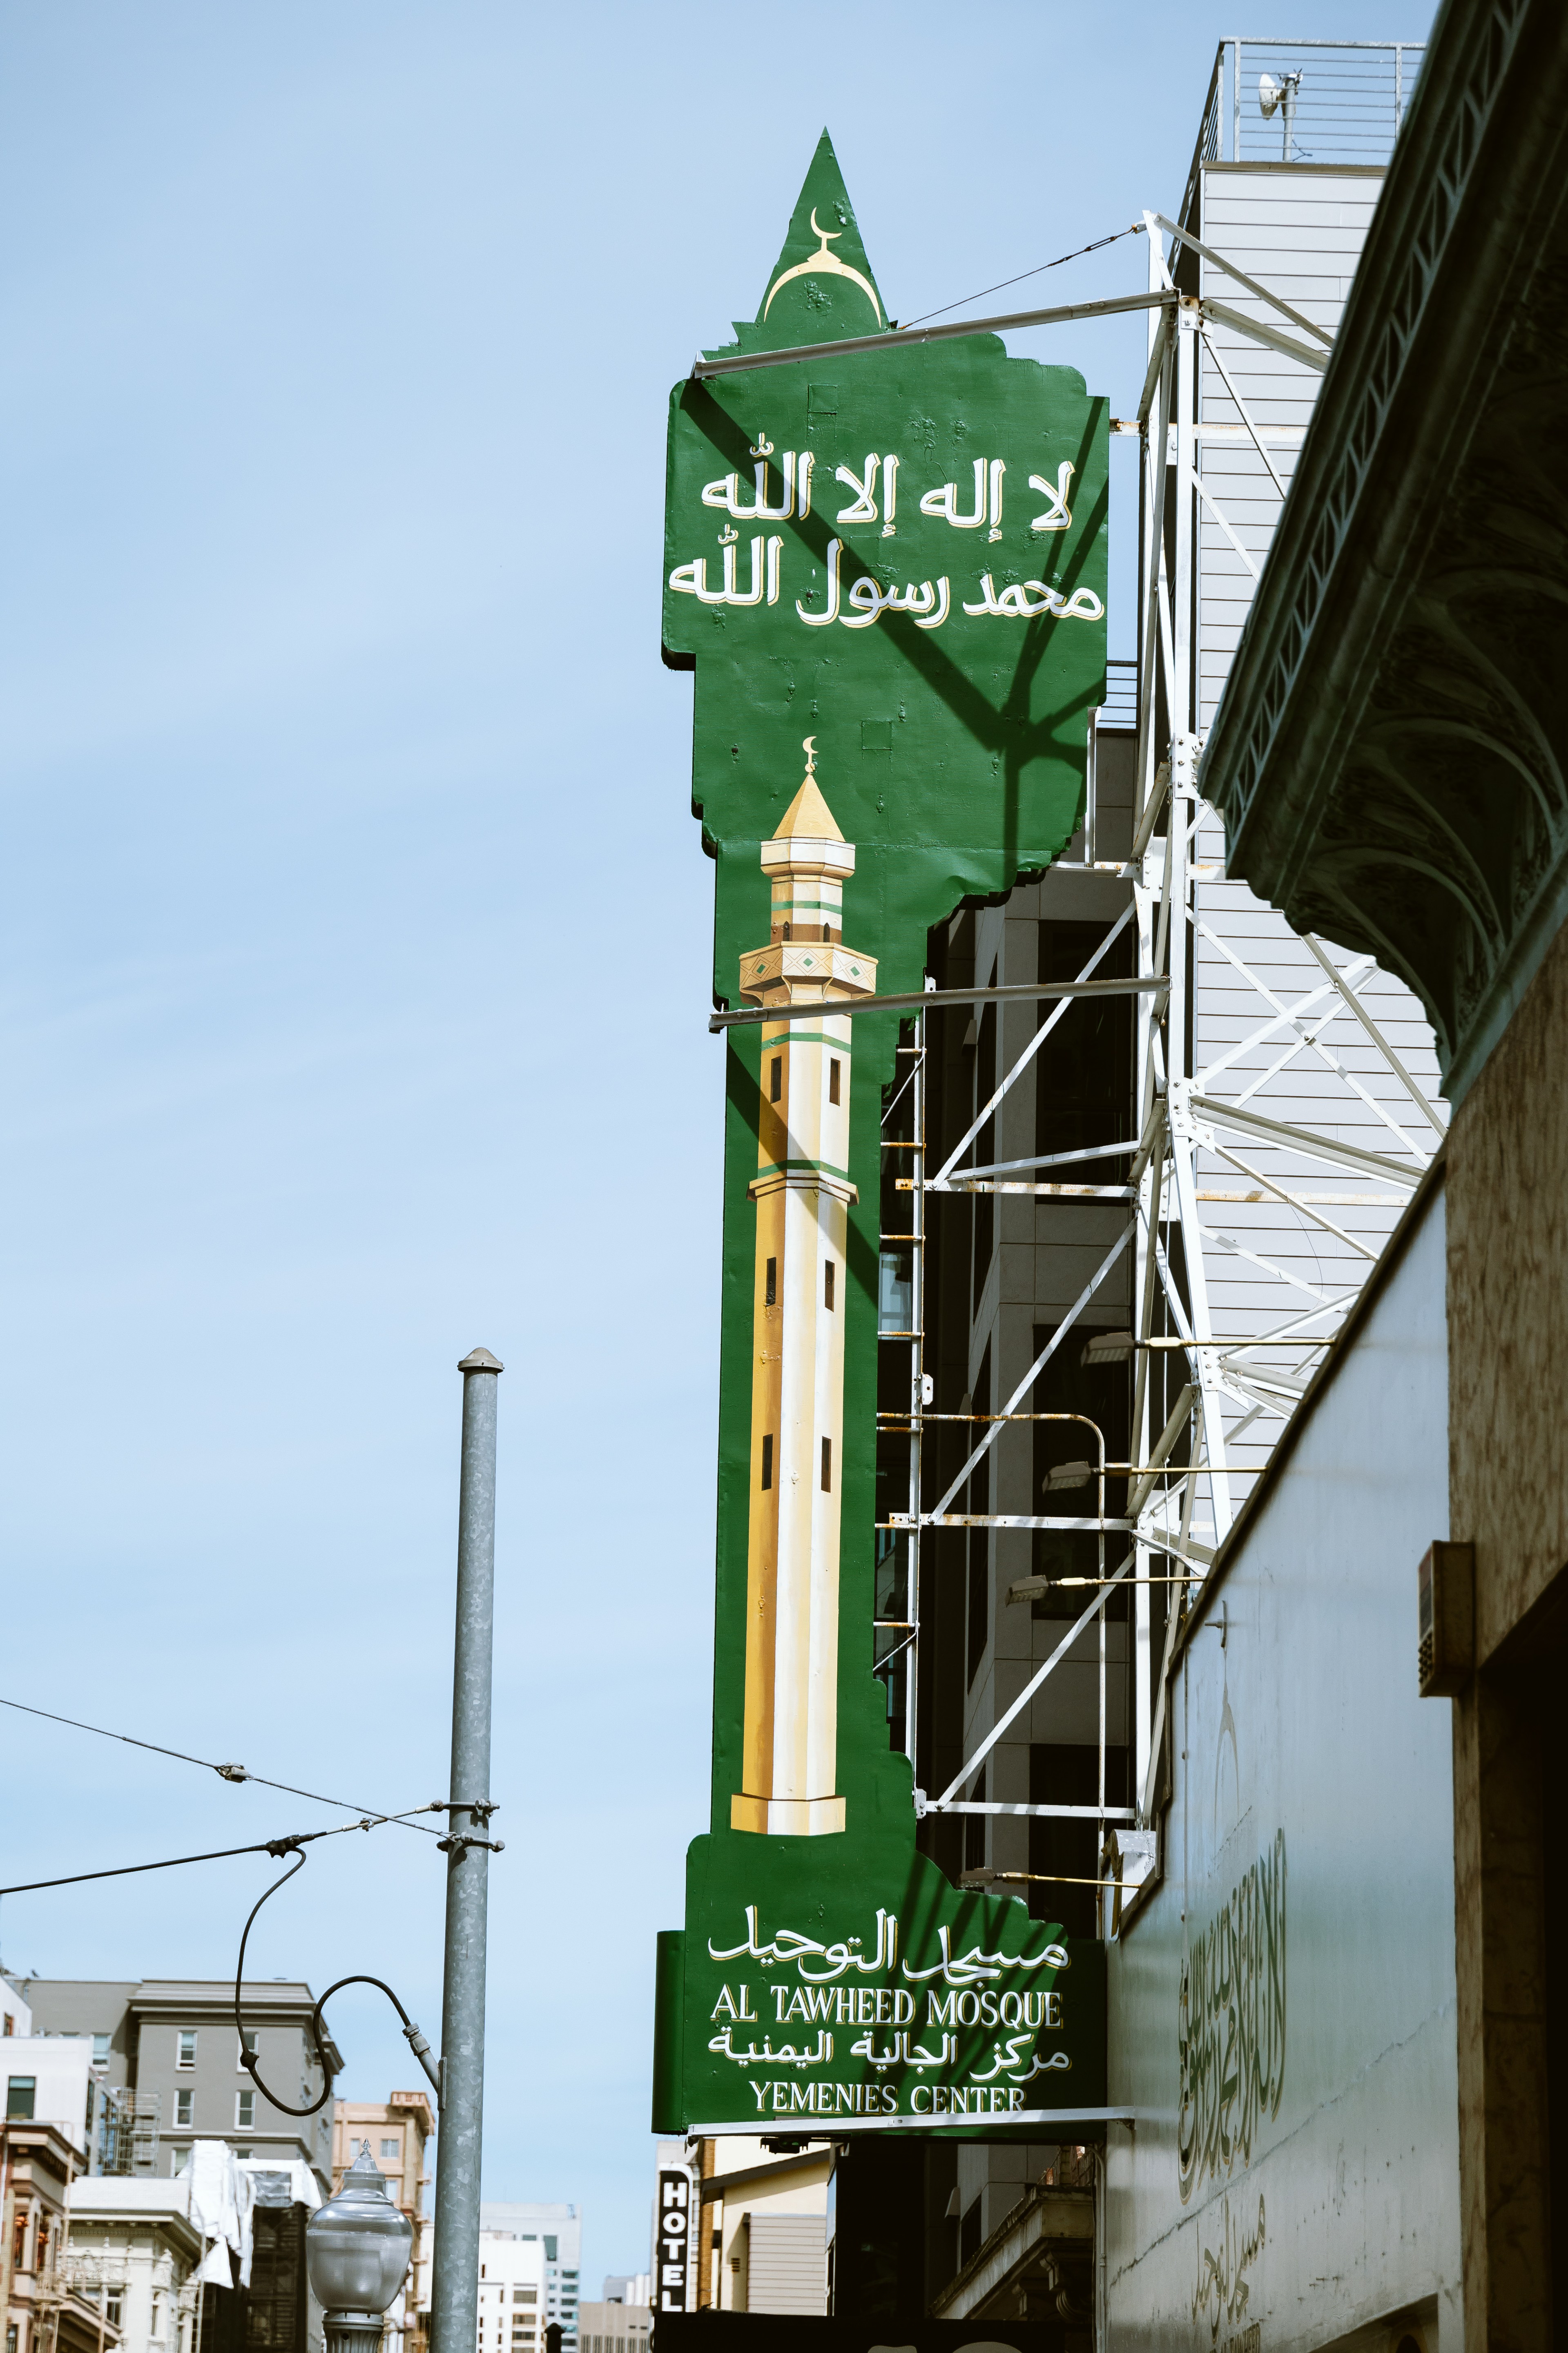 A green sign with Arabic text and &quot;AL TAWHEED MOSQUE&quot; written in English, on a building with a golden-domed minaret.